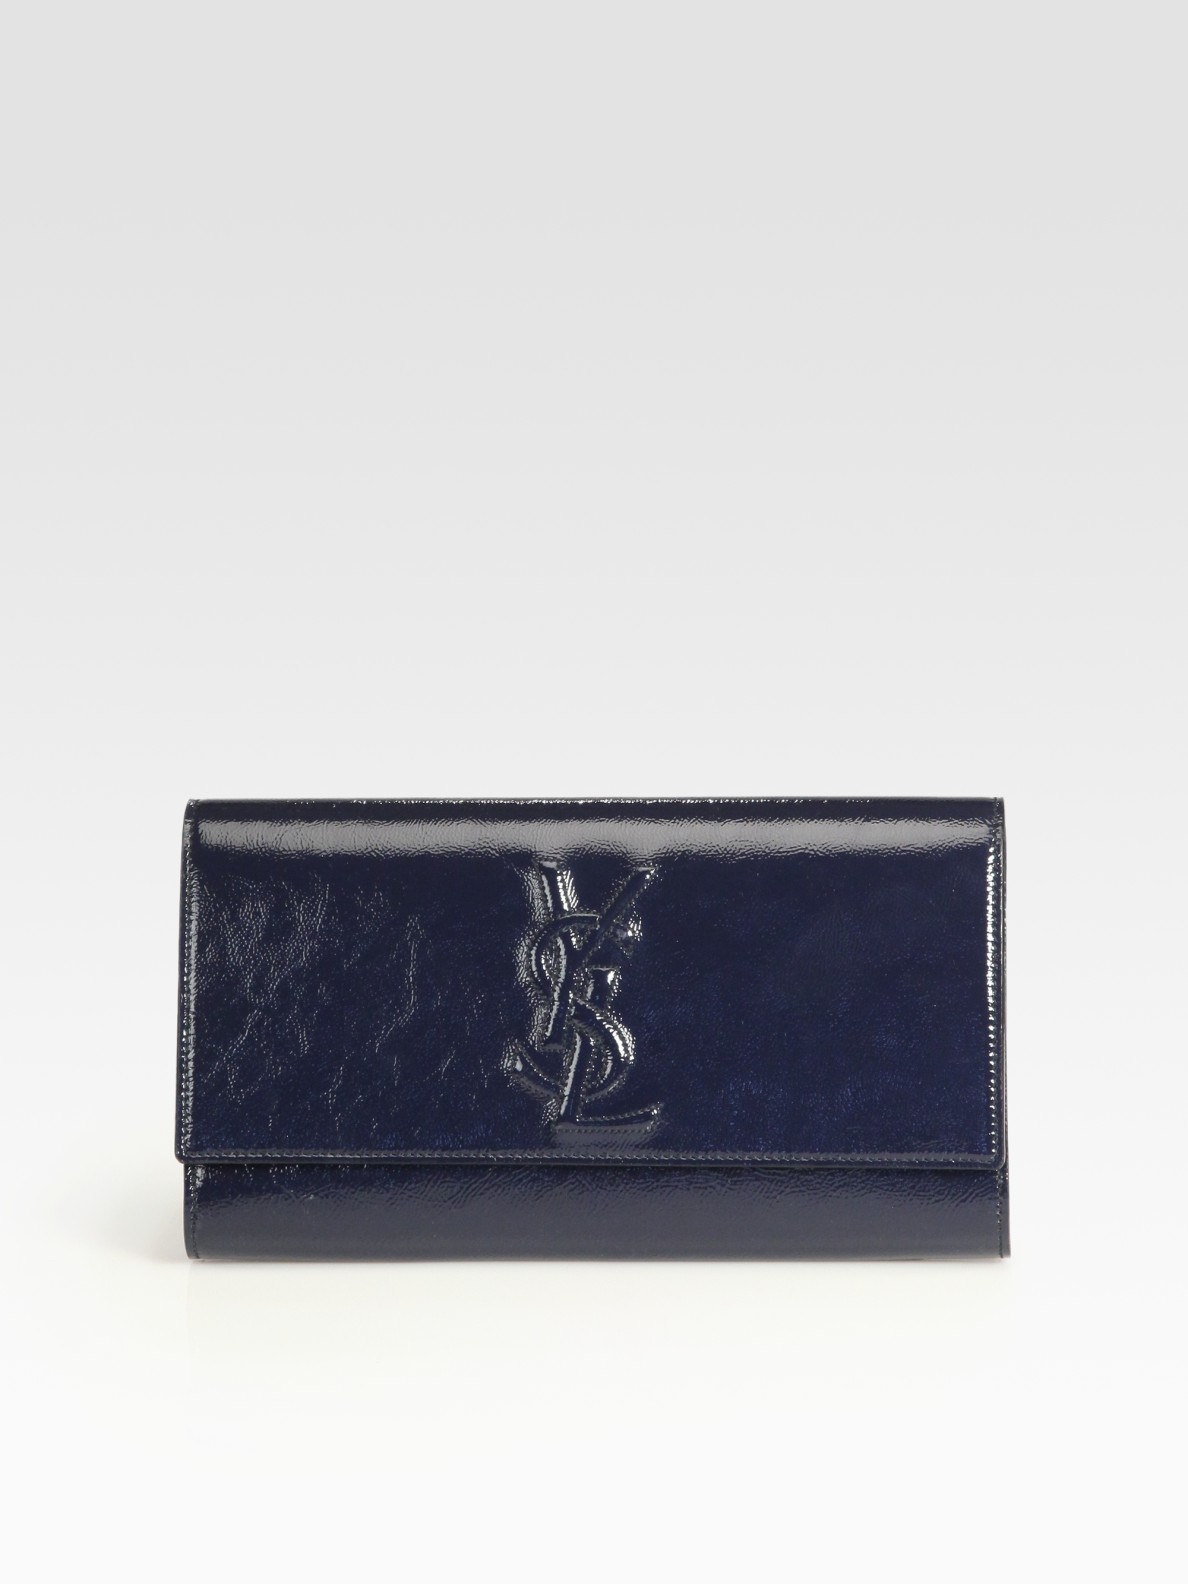 Saint laurent Ysl Large Patent Leather Clutch in Black (navy) | Lyst  